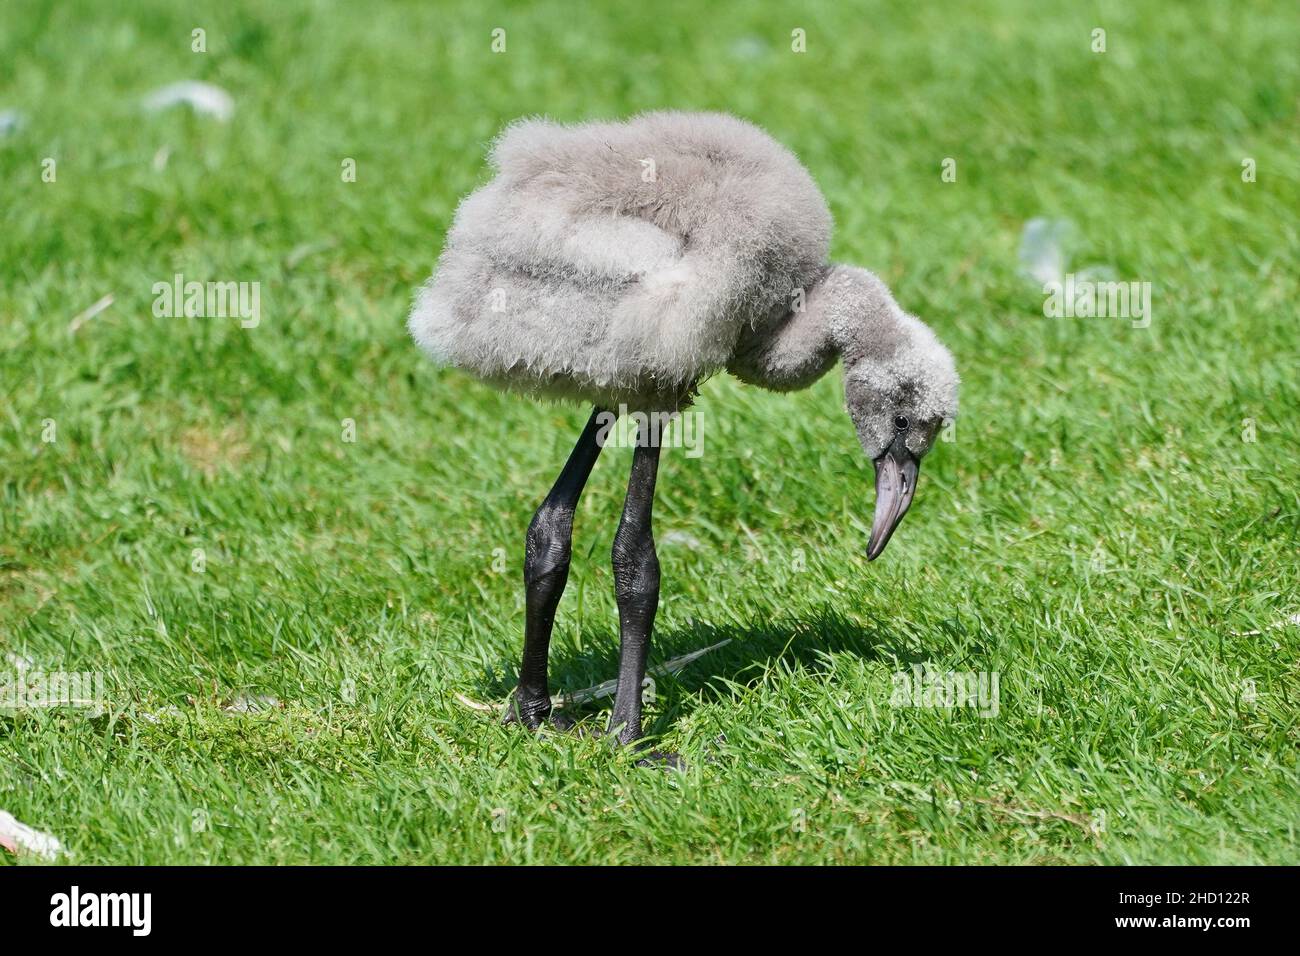 Flamingo chick  Flamingo, (order Phoenicopteriformes), any of six species of tall, pink wading birds with thick downturned bills. Flamingos have slender legs, long, graceful necks, large wings, and short tails. They range from about 90 to 150 cm (3 to 5 feet) tall. Stock Photo